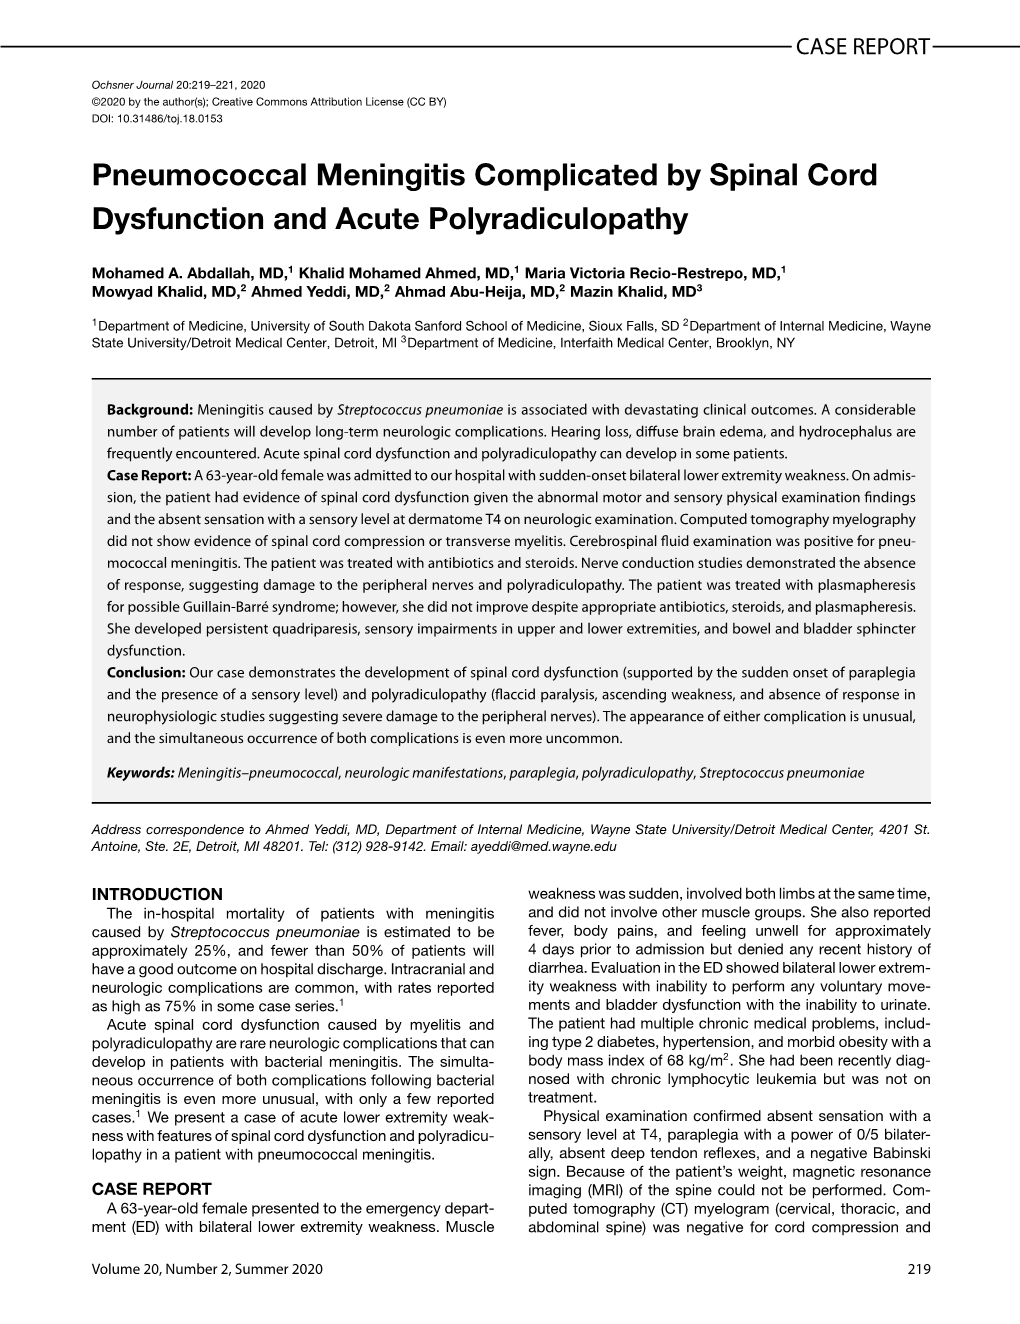 Pneumococcal Meningitis Complicated by Spinal Cord Dysfunction and Acute Polyradiculopathy